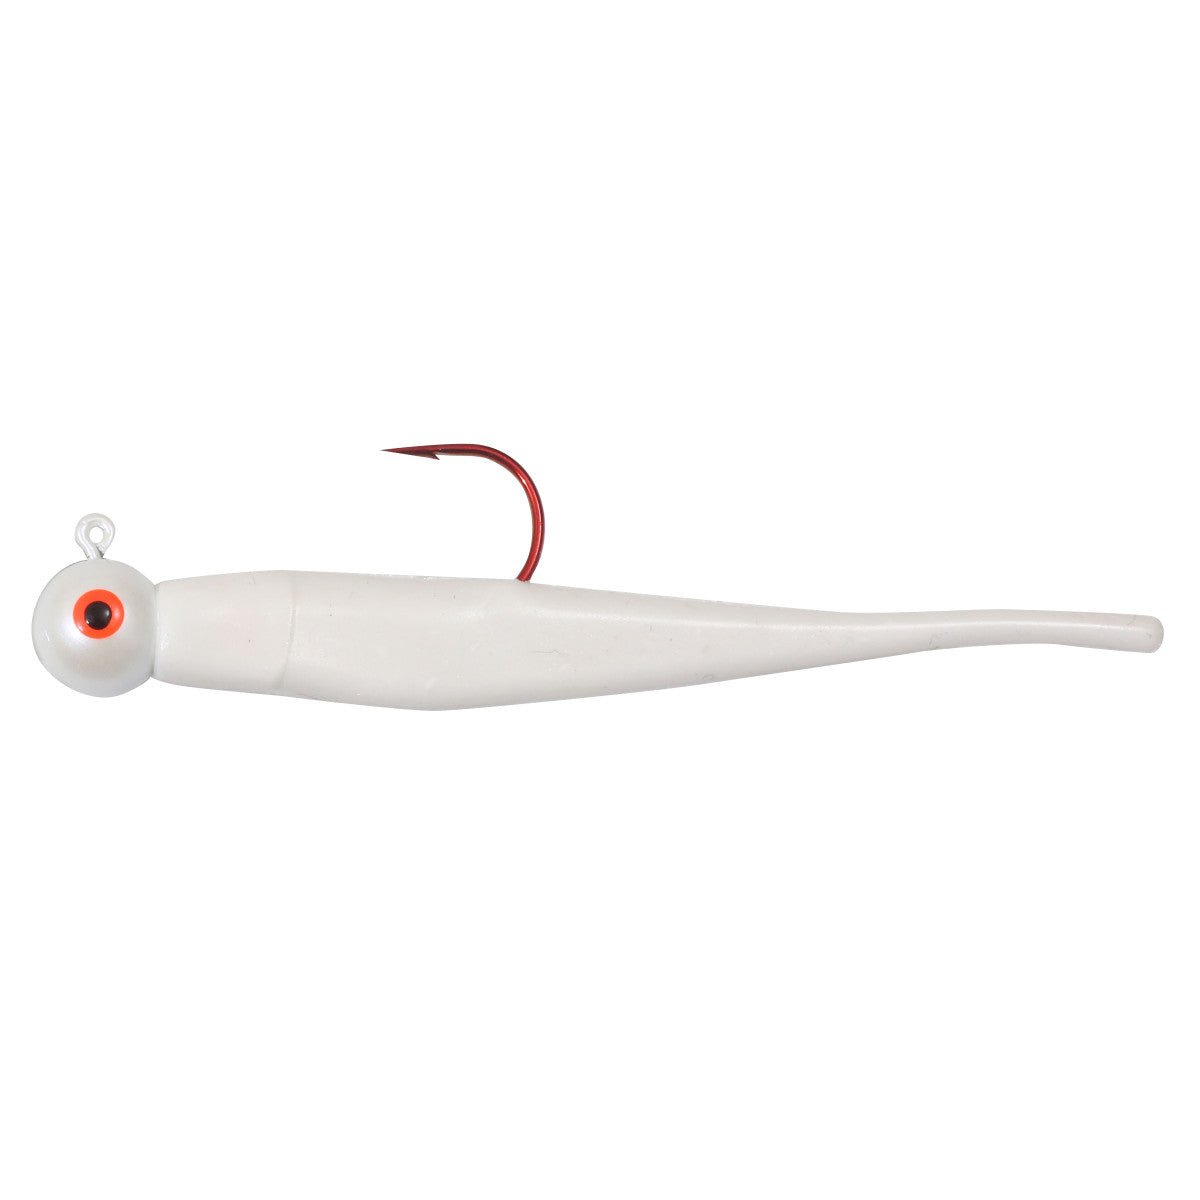 Northland Rigged Gum-Ball Jig Minnow - Hamilton Bait and Tackle